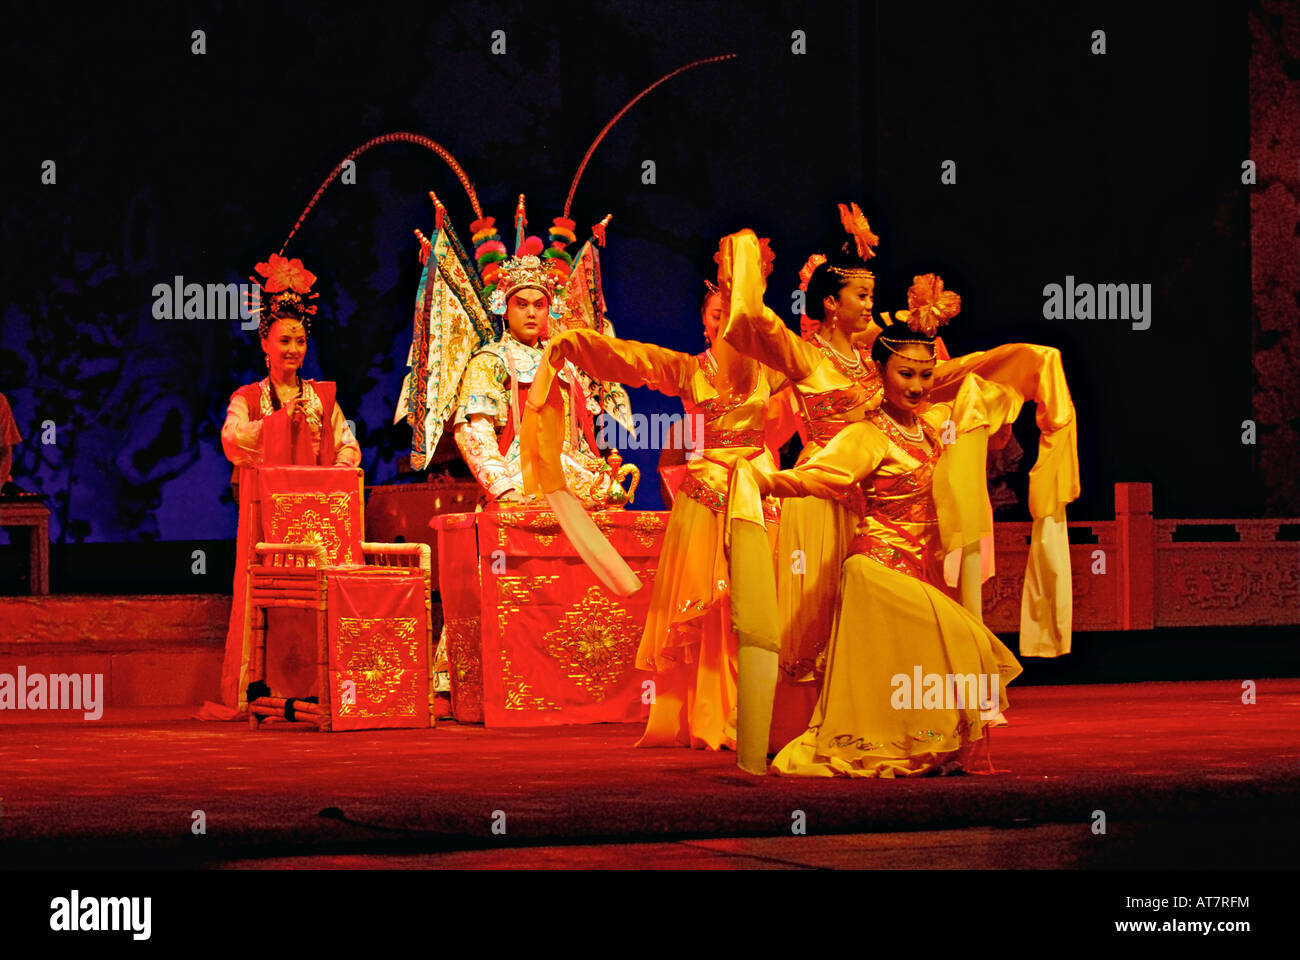 Performers in traditional costume Sichuan Opera Chengdu China Stock Photo